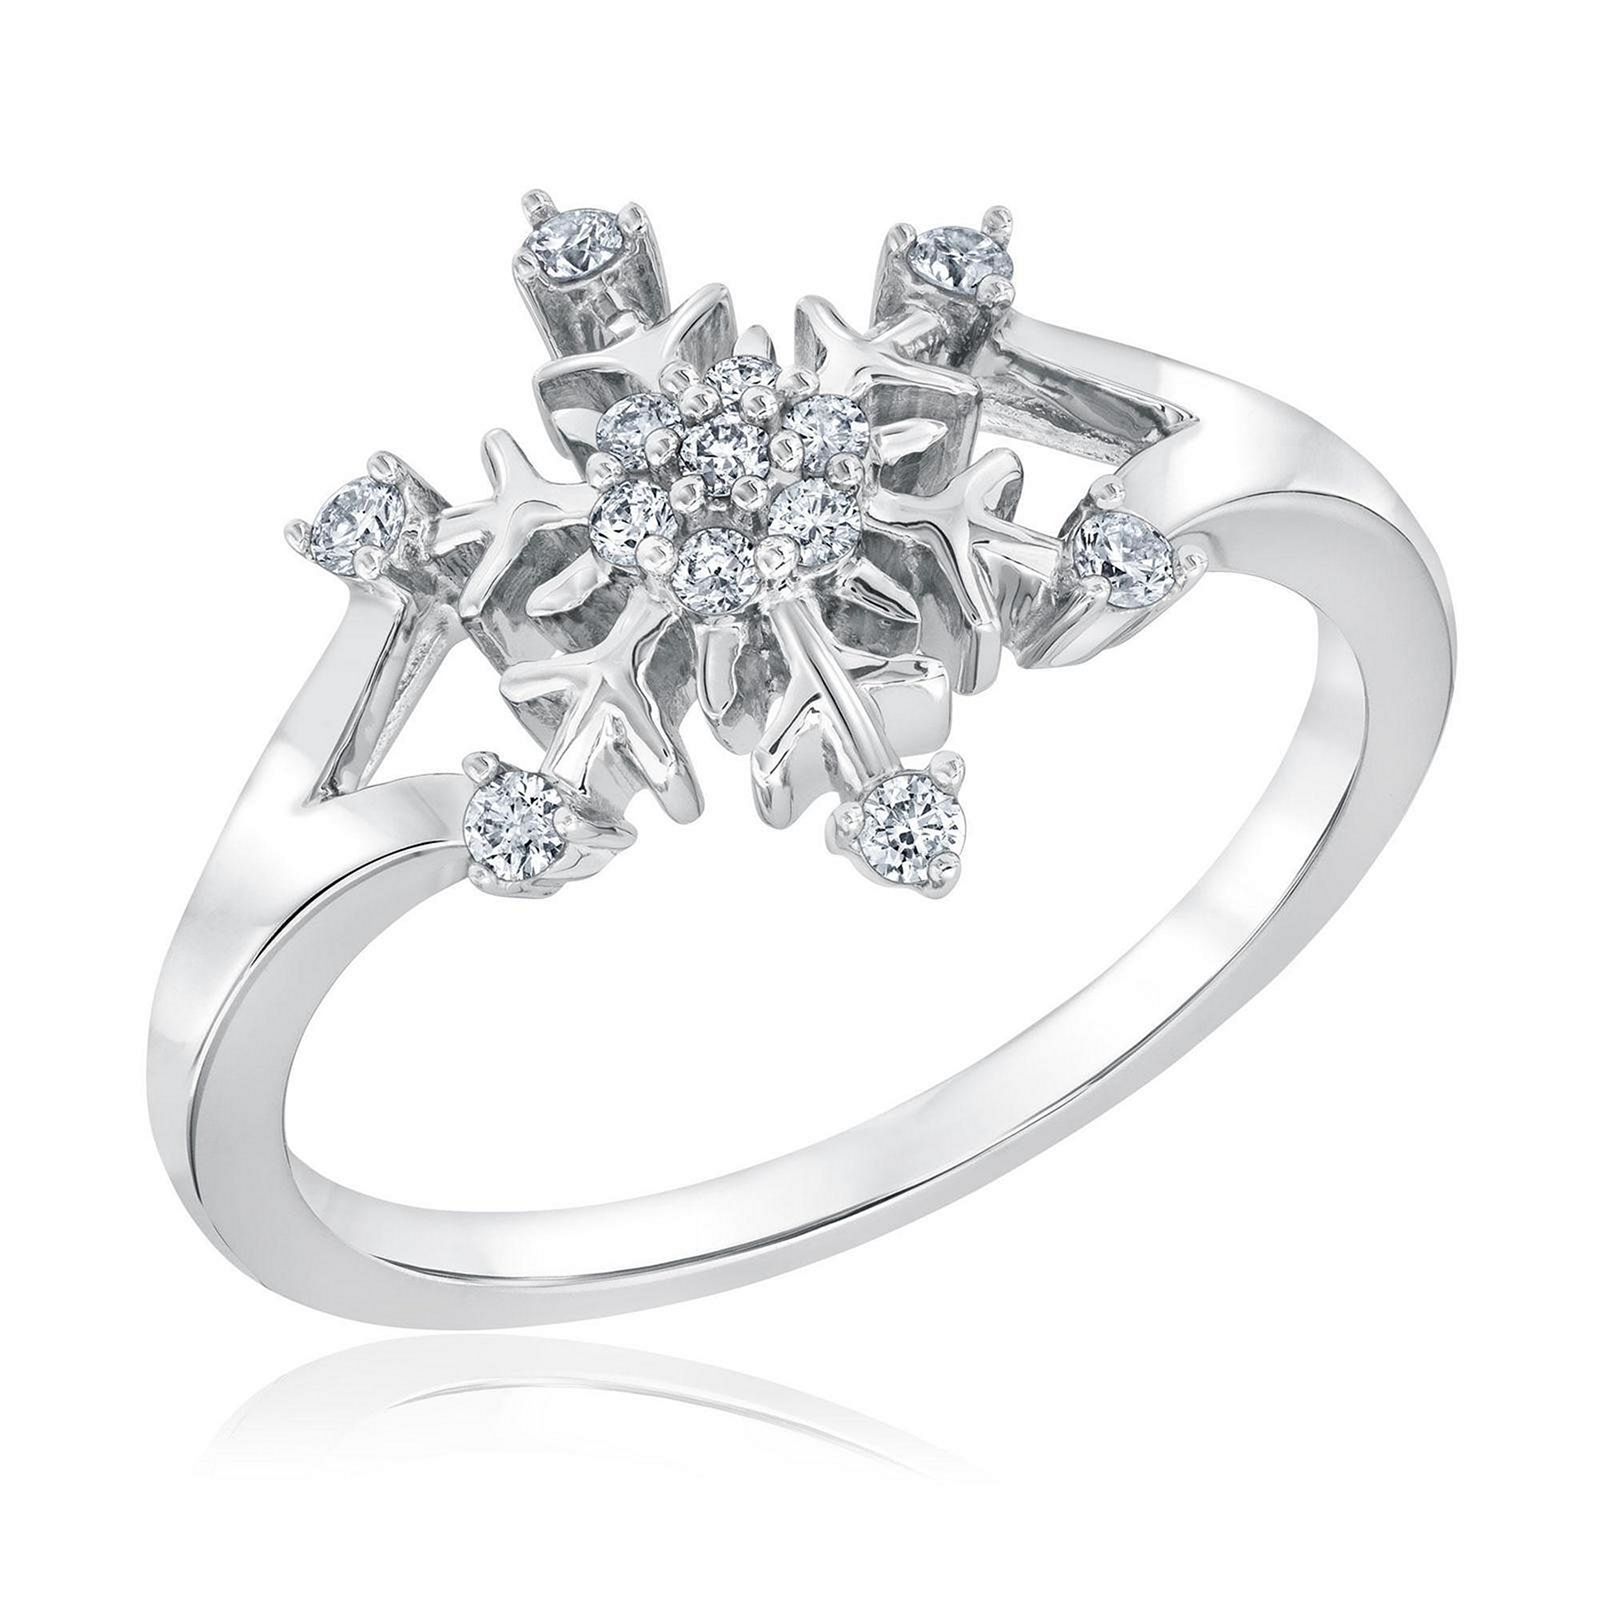 Frozen engagement ring from gift-shop22.co.uk